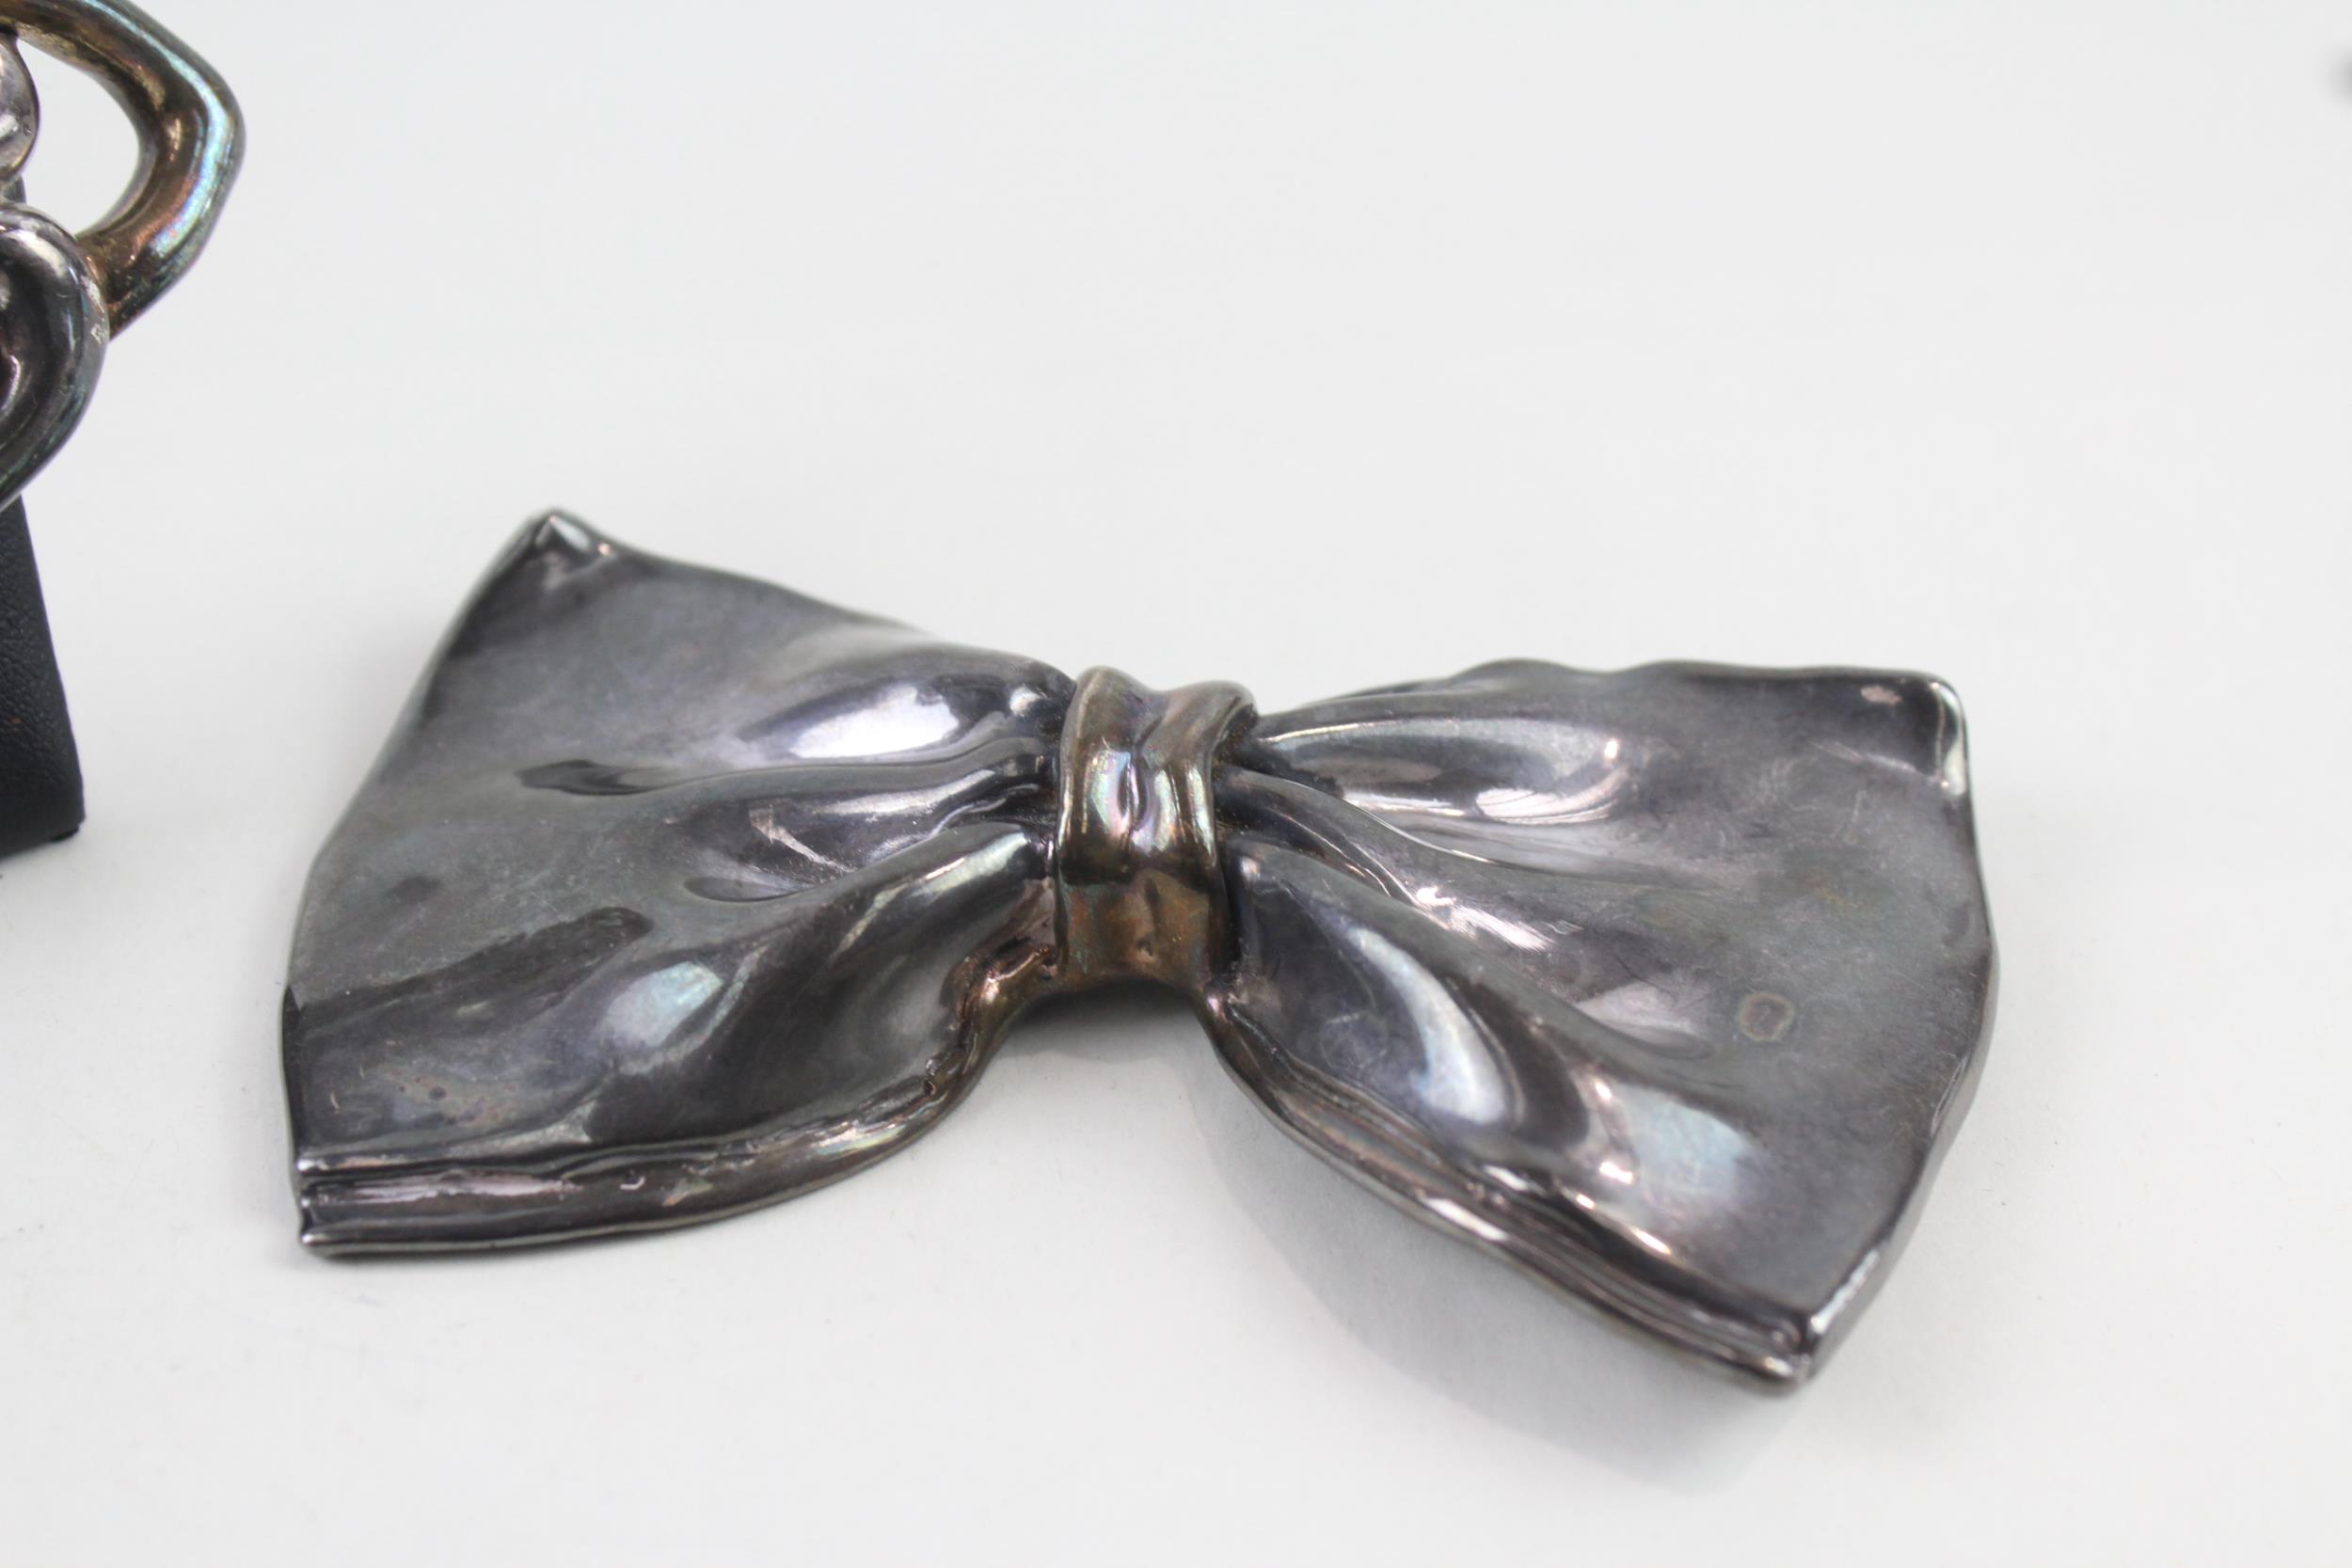 Silver brooch/pendant and clip on earrings by Bat Ami Israel (79g) - Image 3 of 7